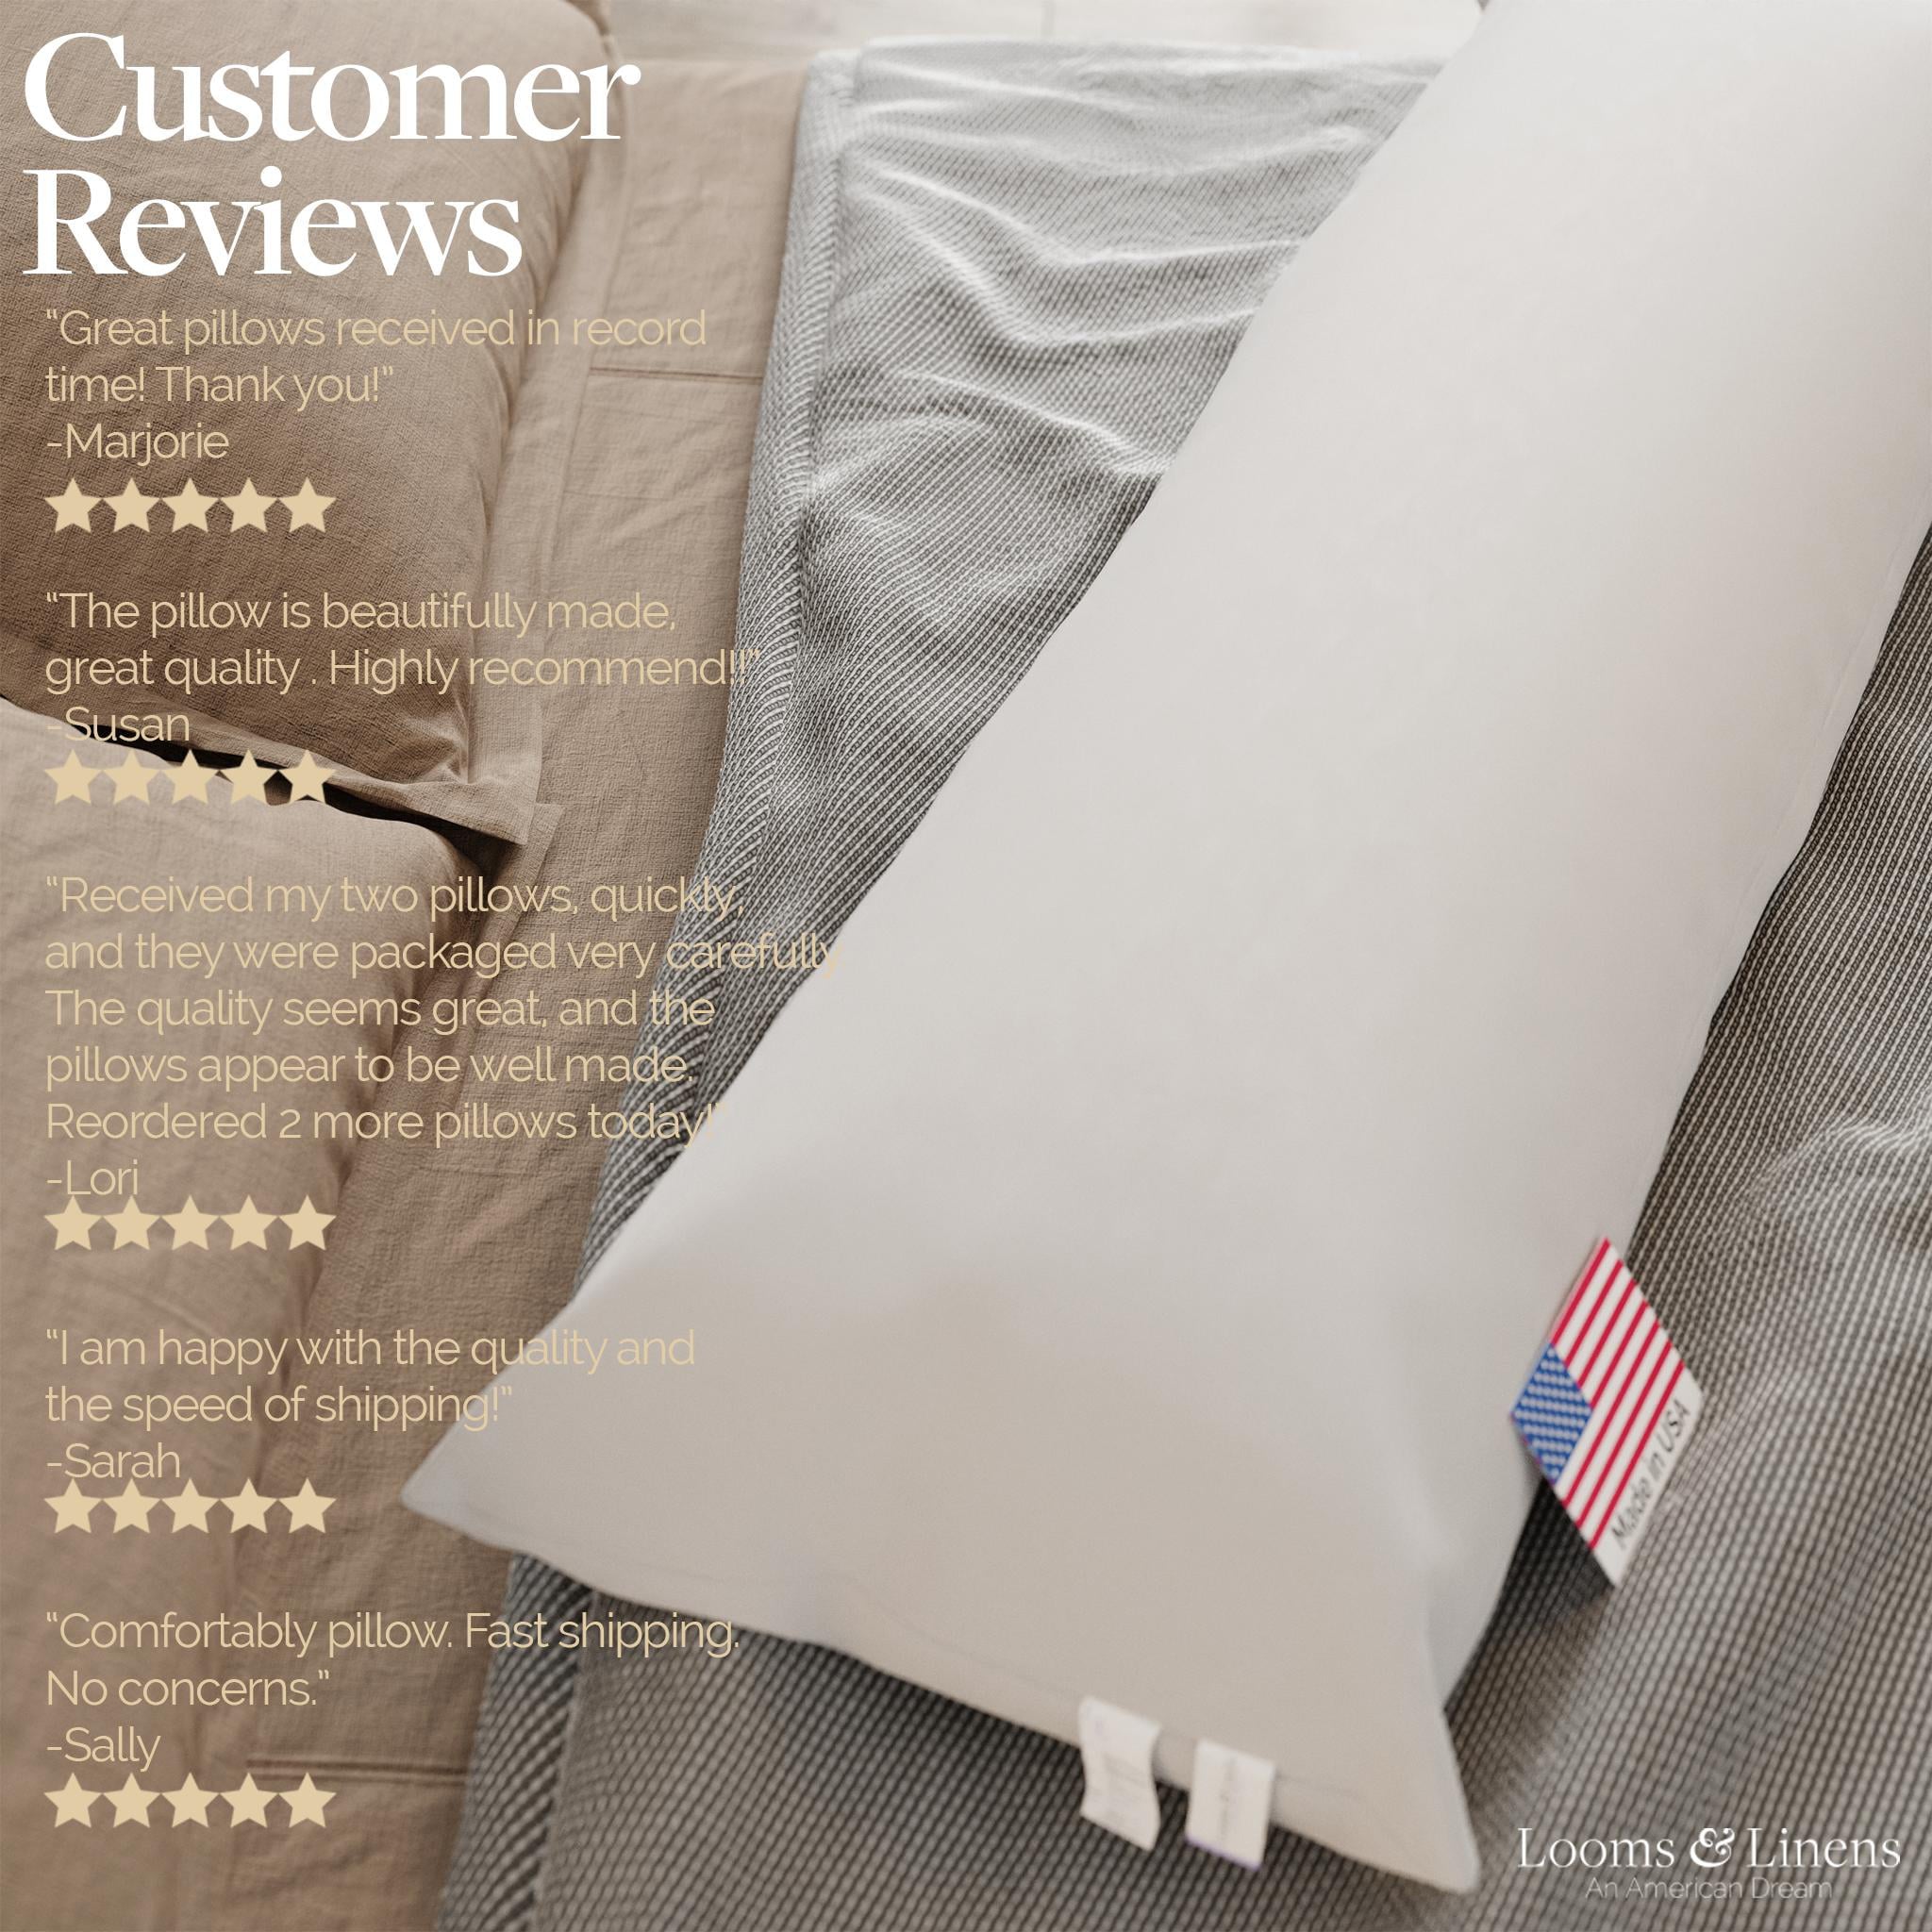 Looms & Linens Full Body Pillow Dakimakura Adults Elderly and Pregnant Woman Down Alternative Plush Filling - Long Pillow Posture and Spine Support for Rem Sleep Pillow Small 20 x 48 inch 1 Pack